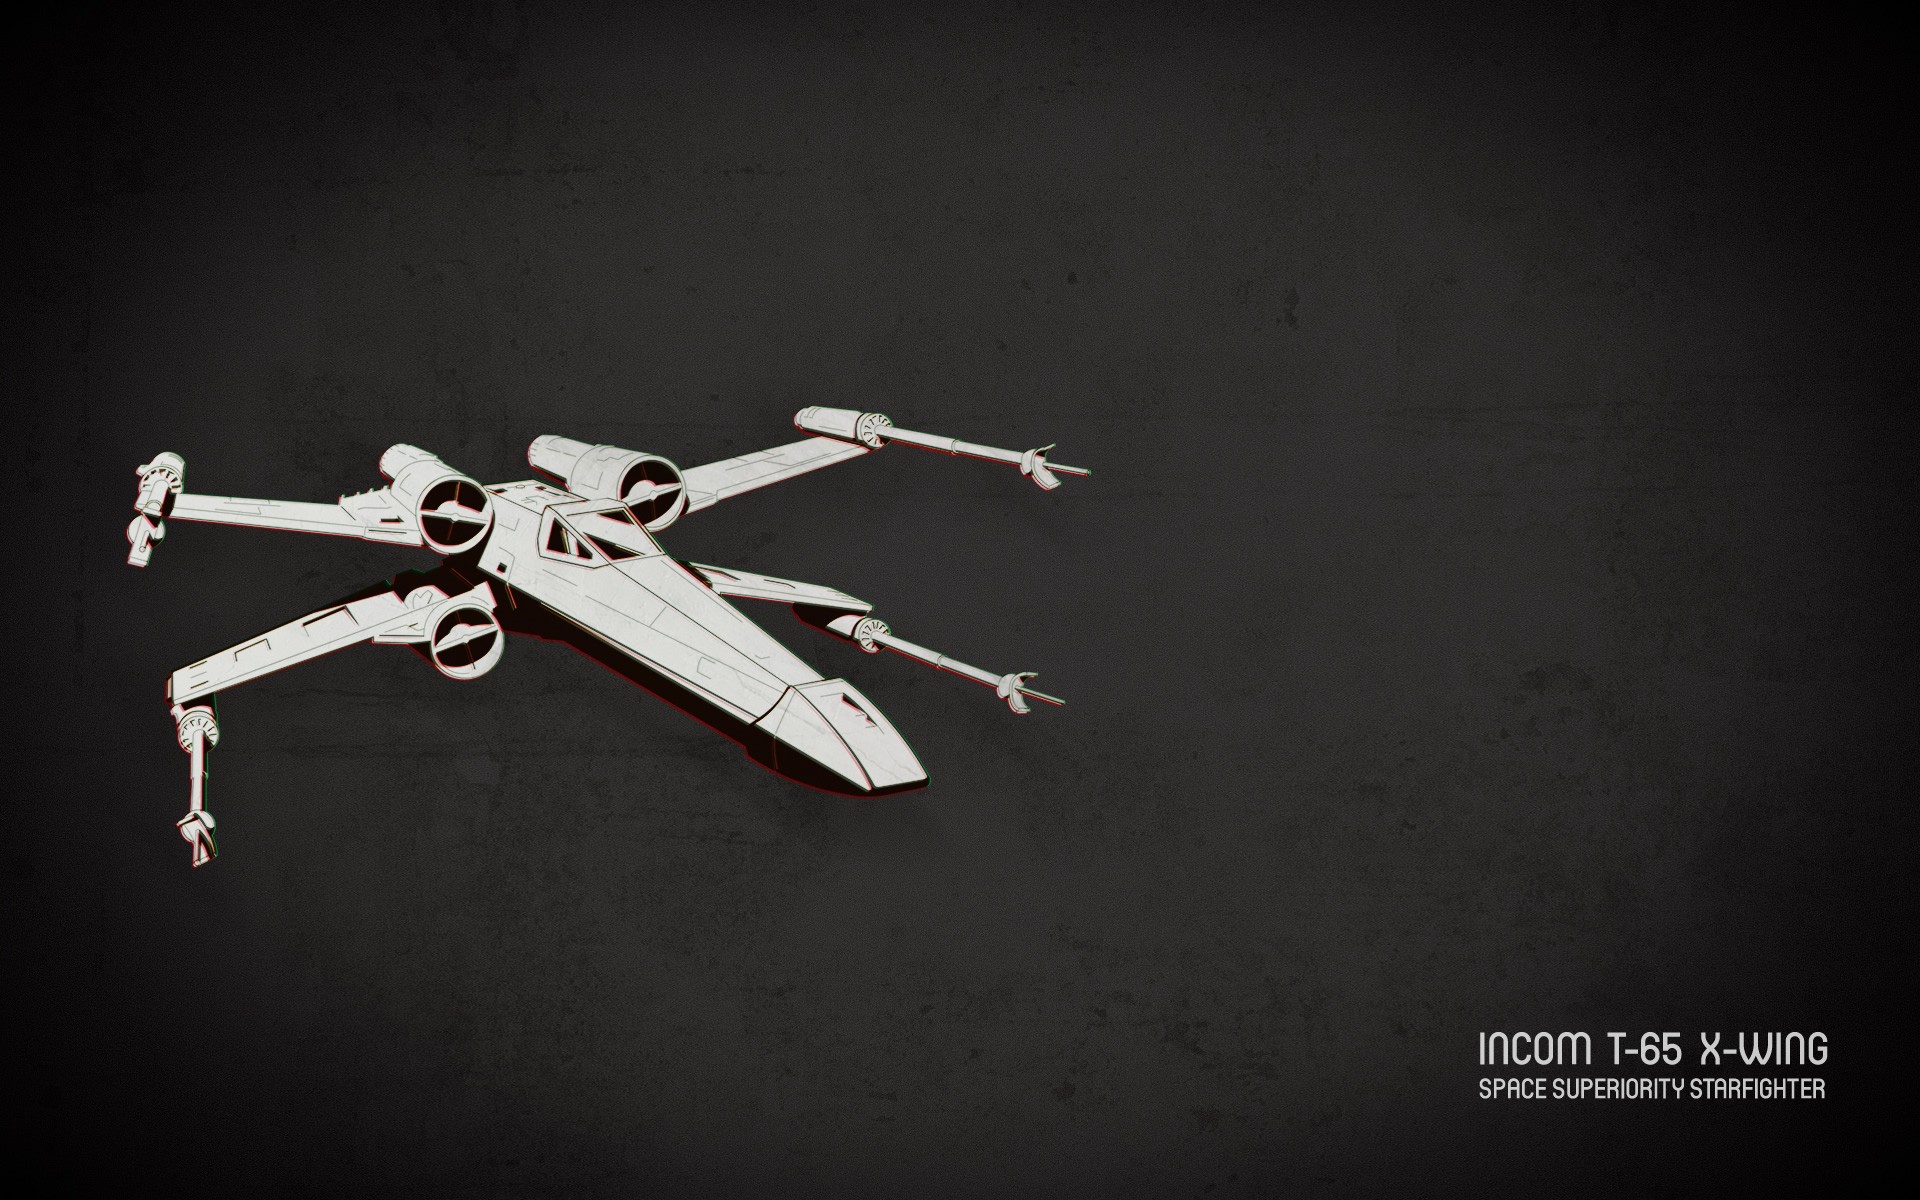 General 1920x1200 Star Wars X-wing minimalism spaceship Star Wars Ships vehicle simple background science fiction Incom Corporation